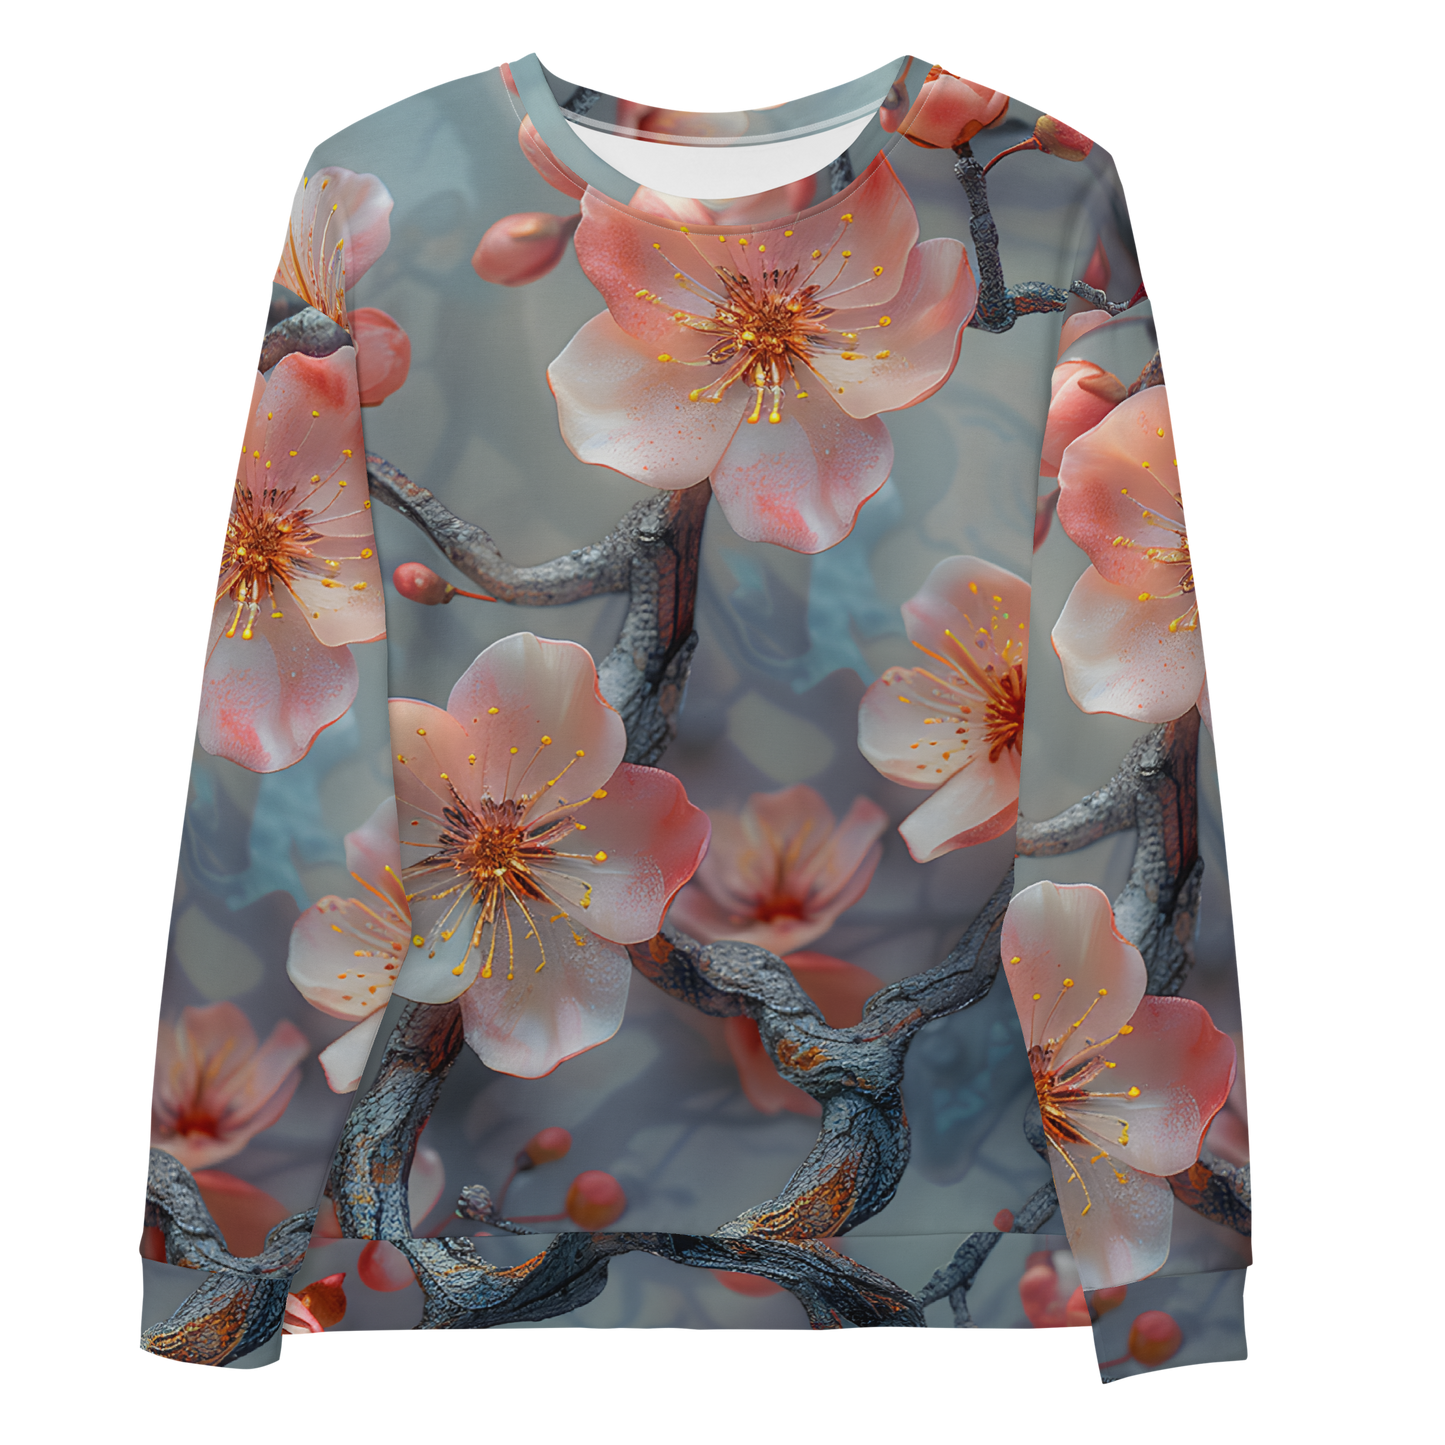 Cherry Blossom Unisex Sweatshirt - Psychedelic All Over Print